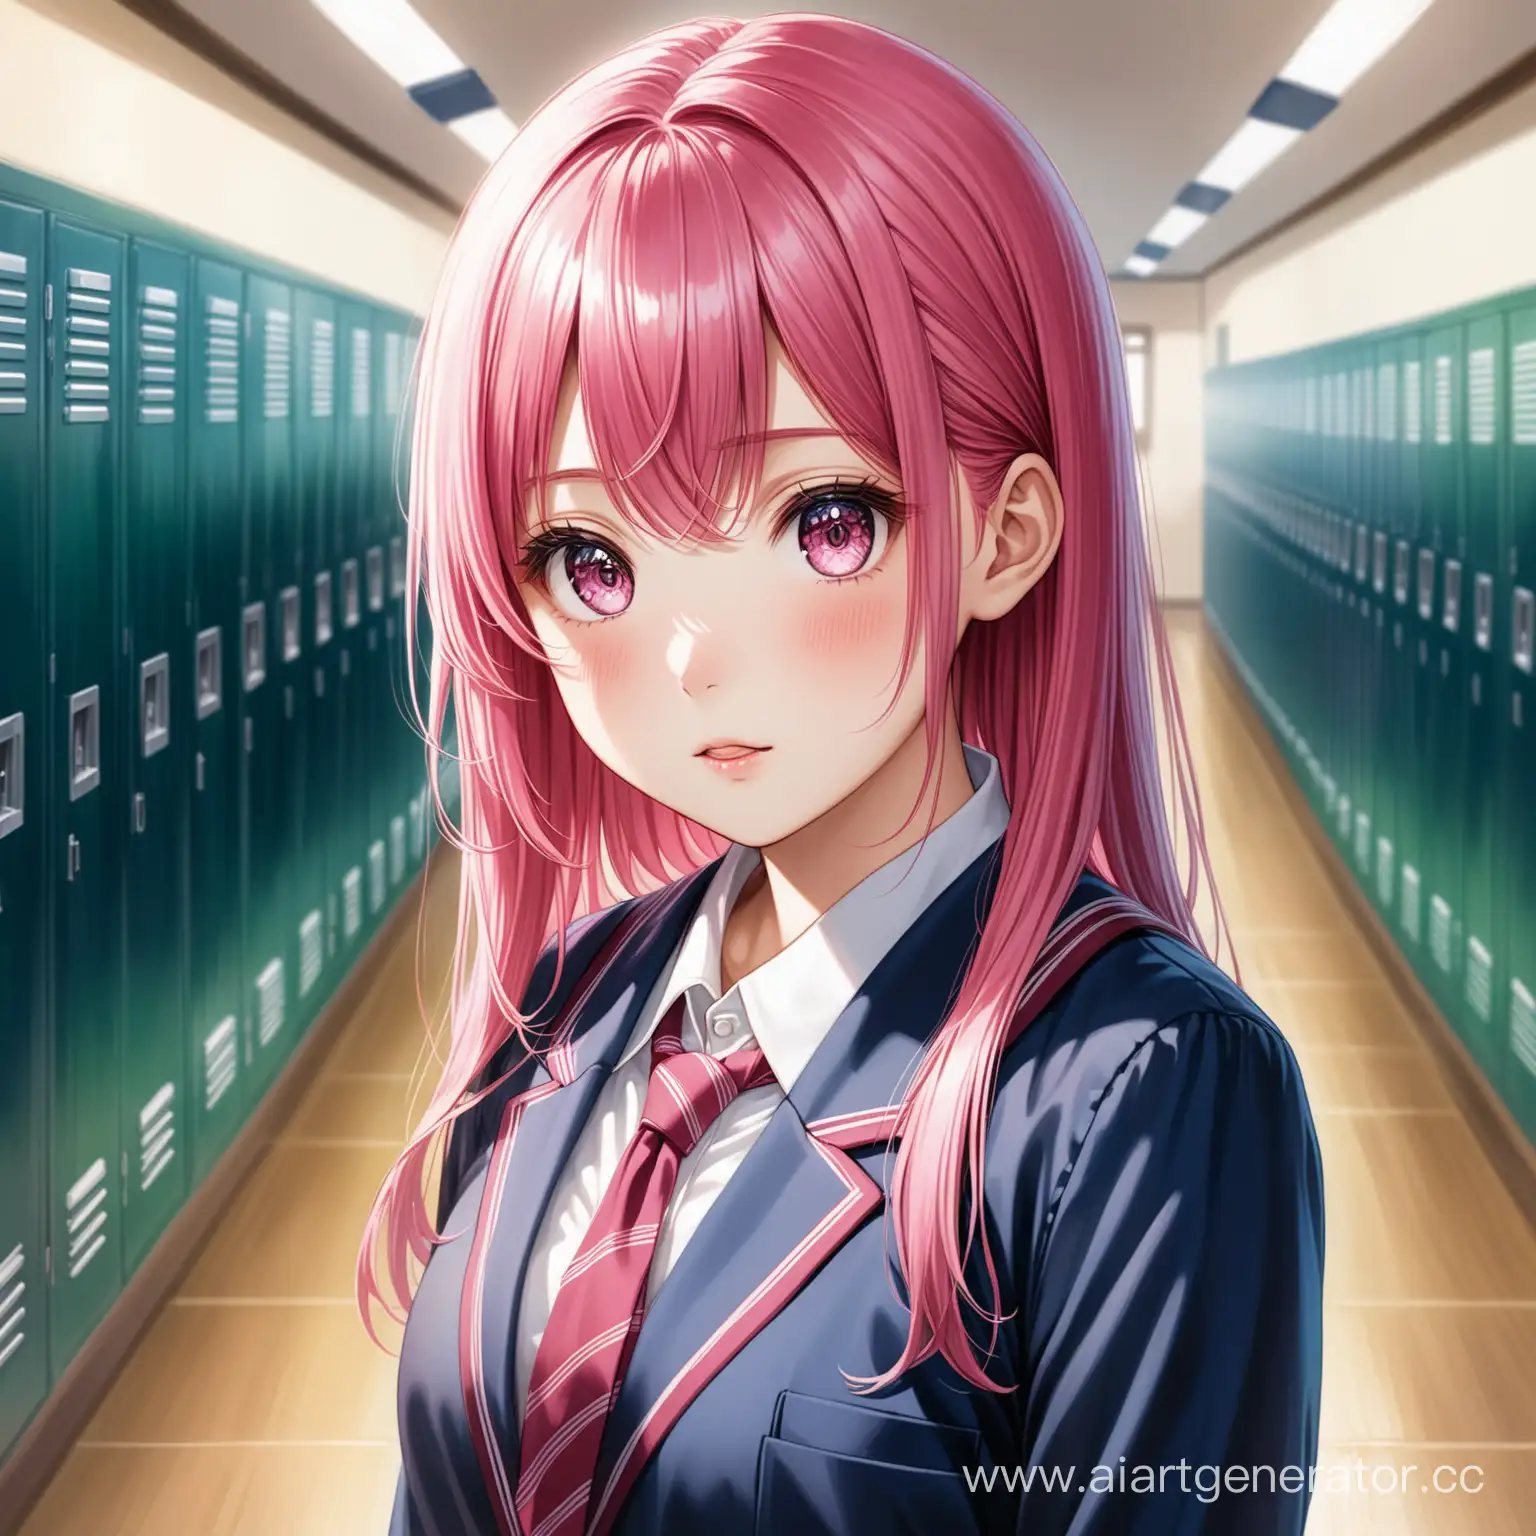 A highly detailed and realistic painting of an anime-style girl with vibrant pink hair and large expressive eyes. She is dressed in a traditional Japanese school uniform, which includes a navy blue blazer, a white blouse, and a pleated skirt. The background is a soft, blurred depiction of a school corridor with lockers. The painting captures a delicate balance between anime characteristics and lifelike details, emphasizing textures like the fabric of the uniform and the shine of her hair.","size":"1024x1024"}Here is the detailed and realistic painting of an anime-style girl with pink hair, dressed in a Japanese school uniform. You can view the image above.